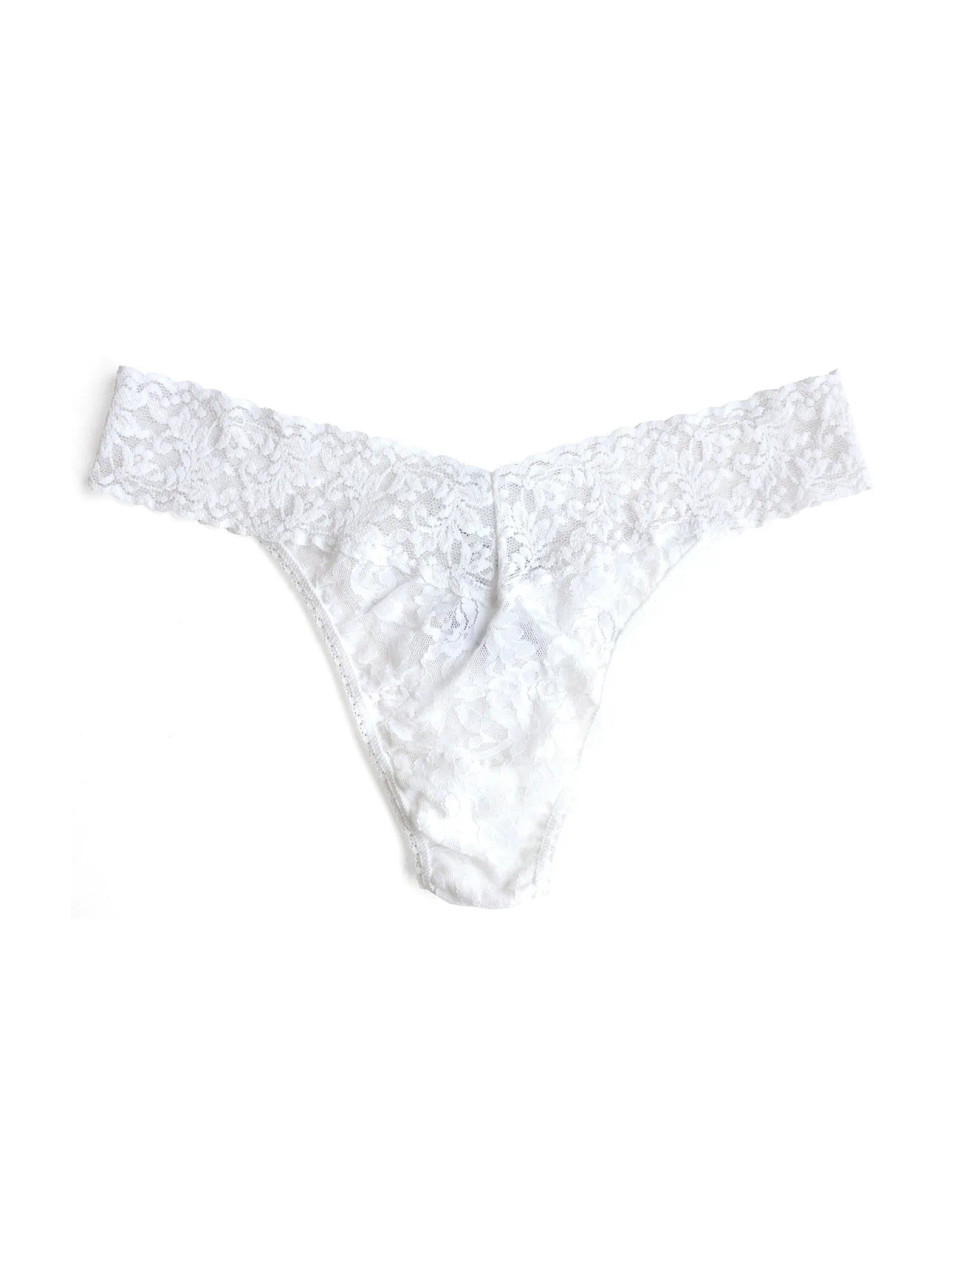 Hanky Panky Signature Lace Original Rise Thong, Rolled - Monkee's